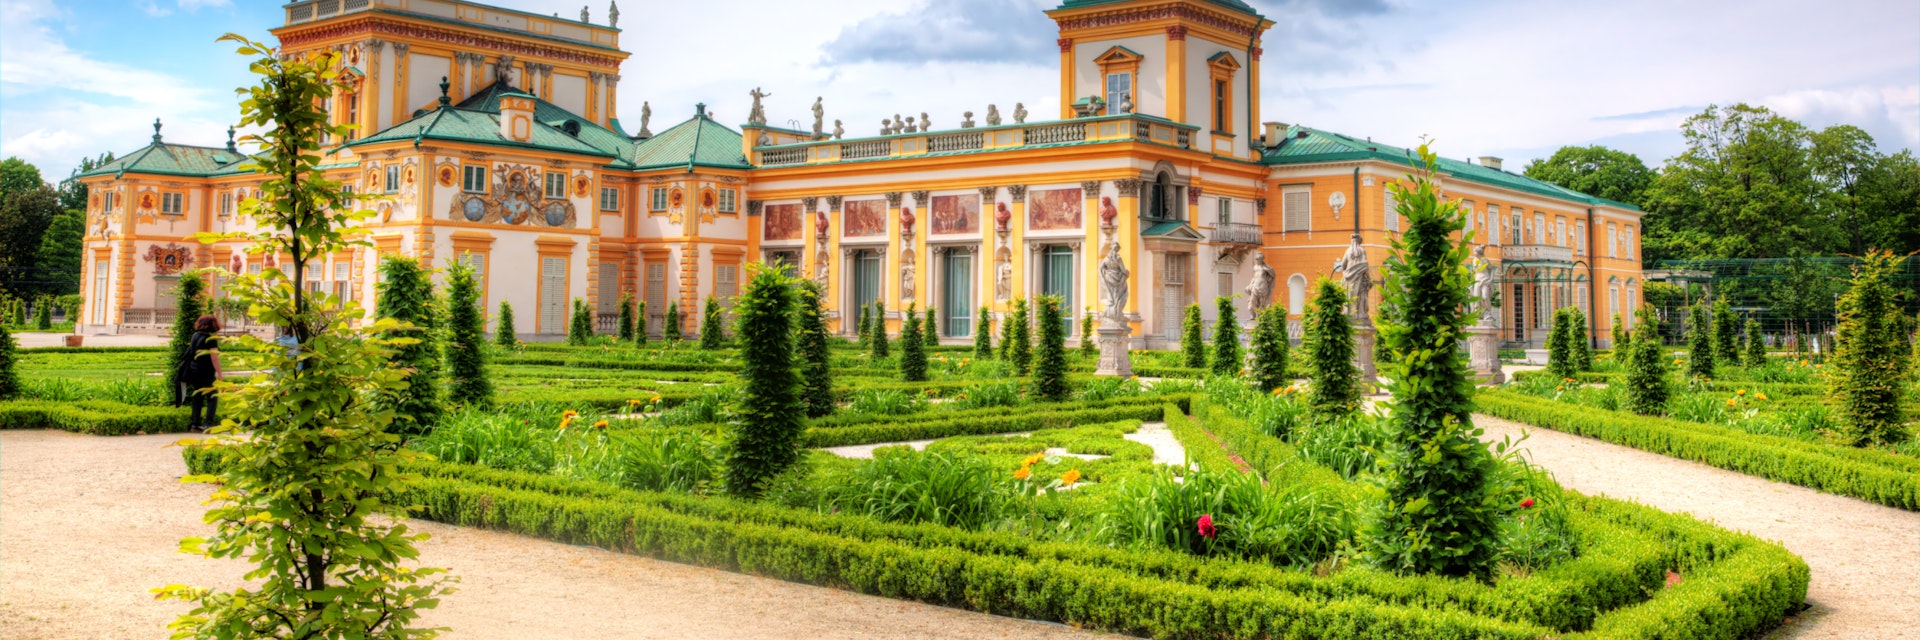 500px Photo ID: 96483849 - The royal Wilanow Palace in Warsaw, Poland. View from Upper Garden